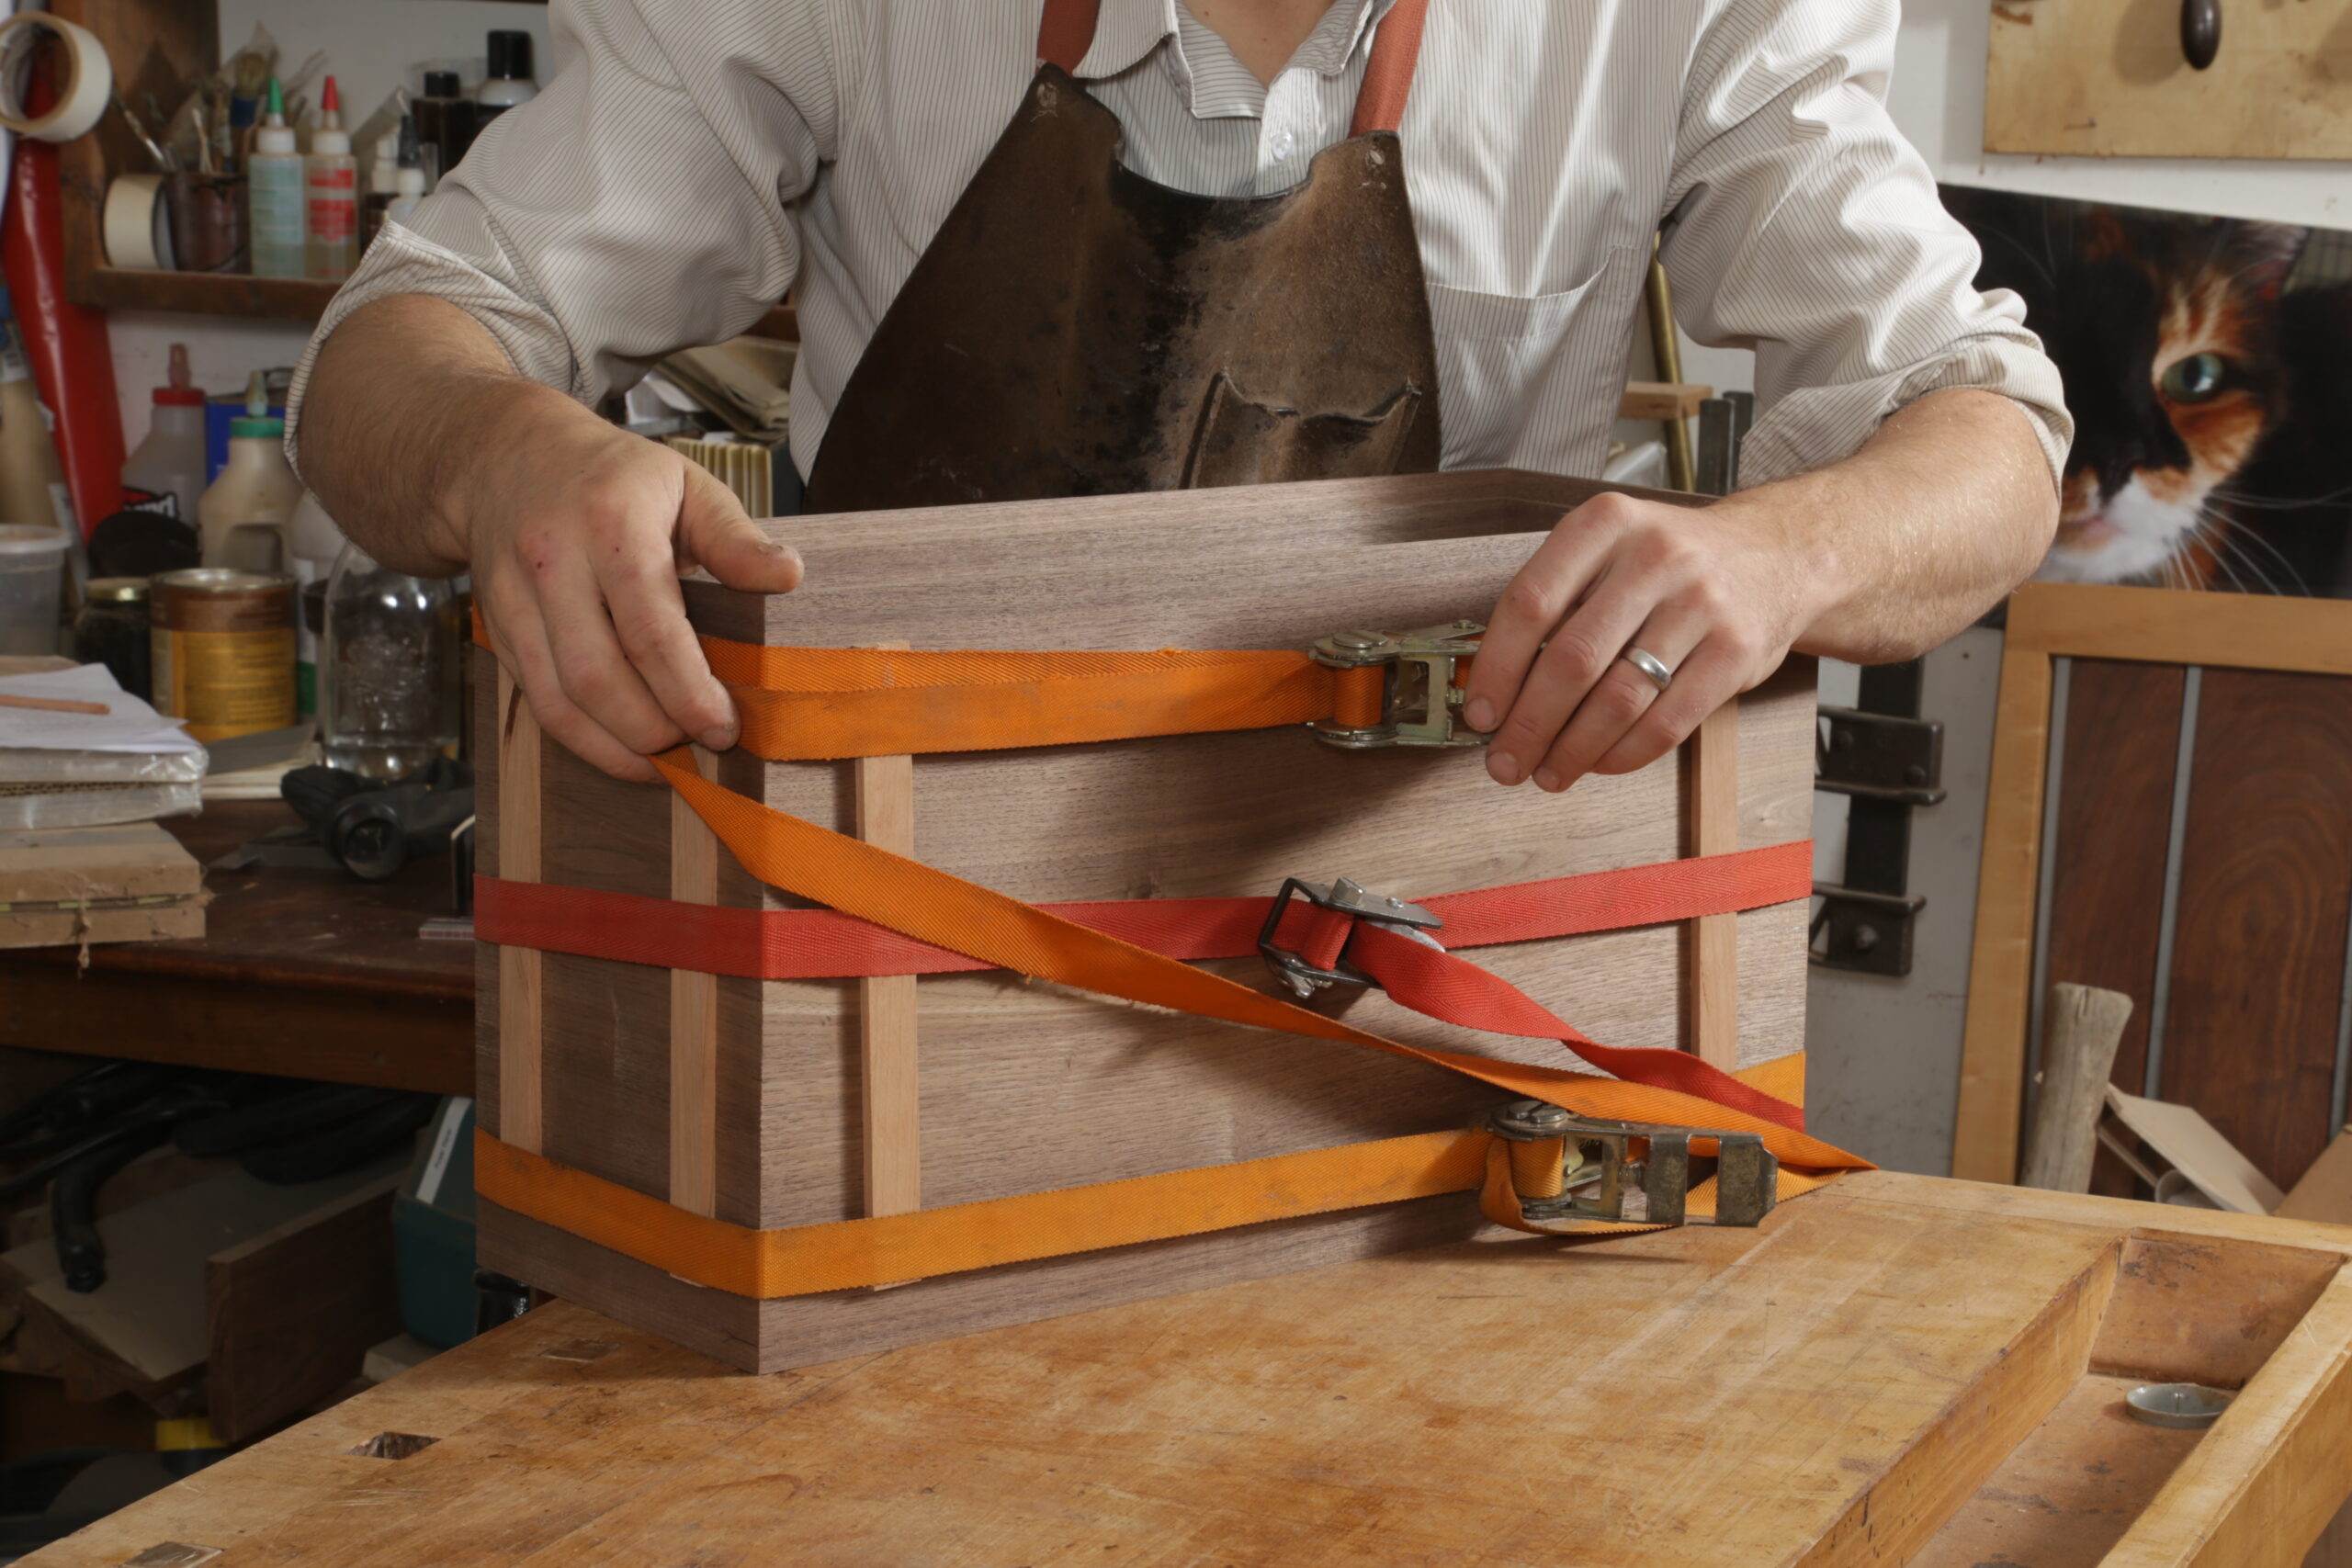 The box carcass is assembled, and the author is clamping it up. He is using two orange ratchet clamps and one red one to apply clamping pressure. At each of the box's corners are two strips of wood between the box and the straps. 